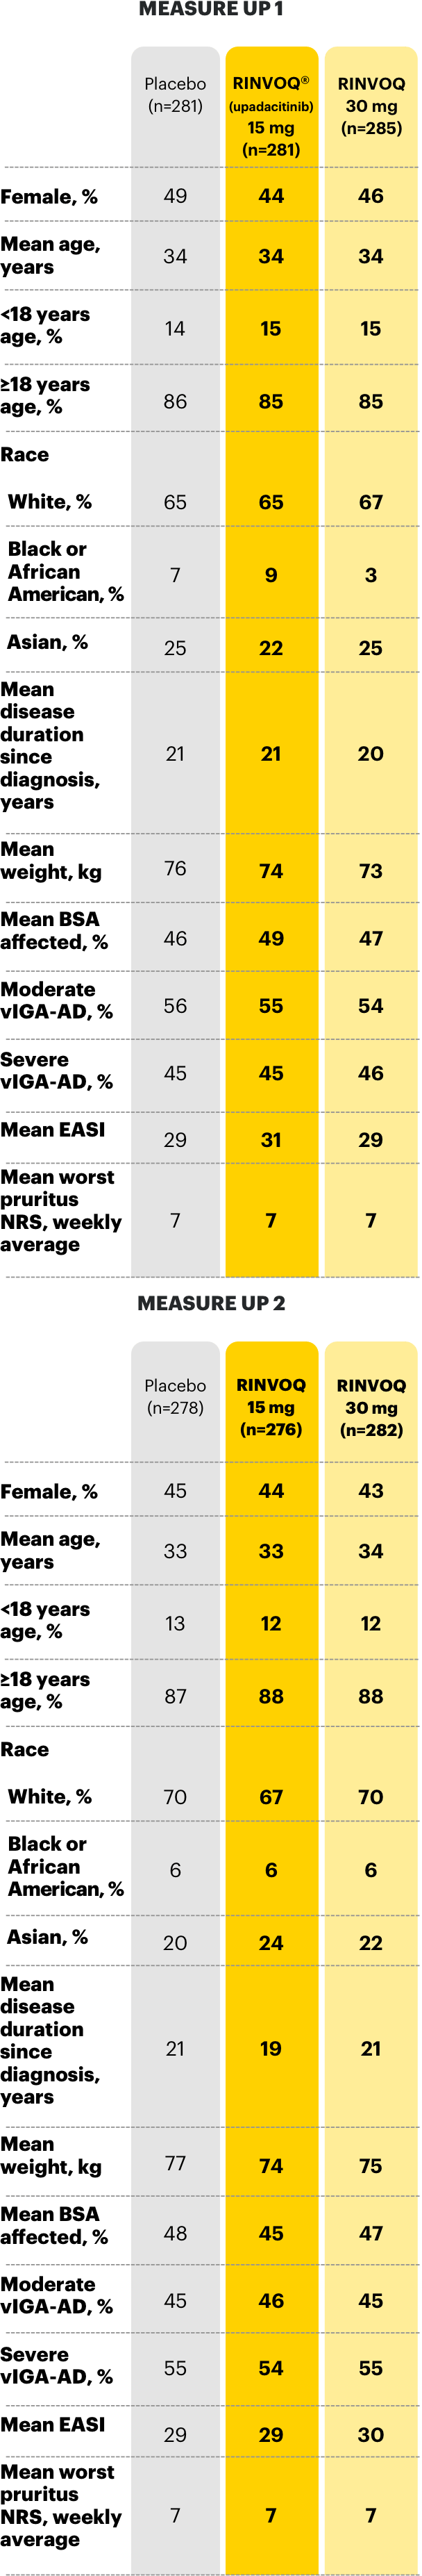 Table outlining the Baseline Characteristics of patients in the Measure Up 1 and 2 trial with RINVOQ® (upadacitinib).